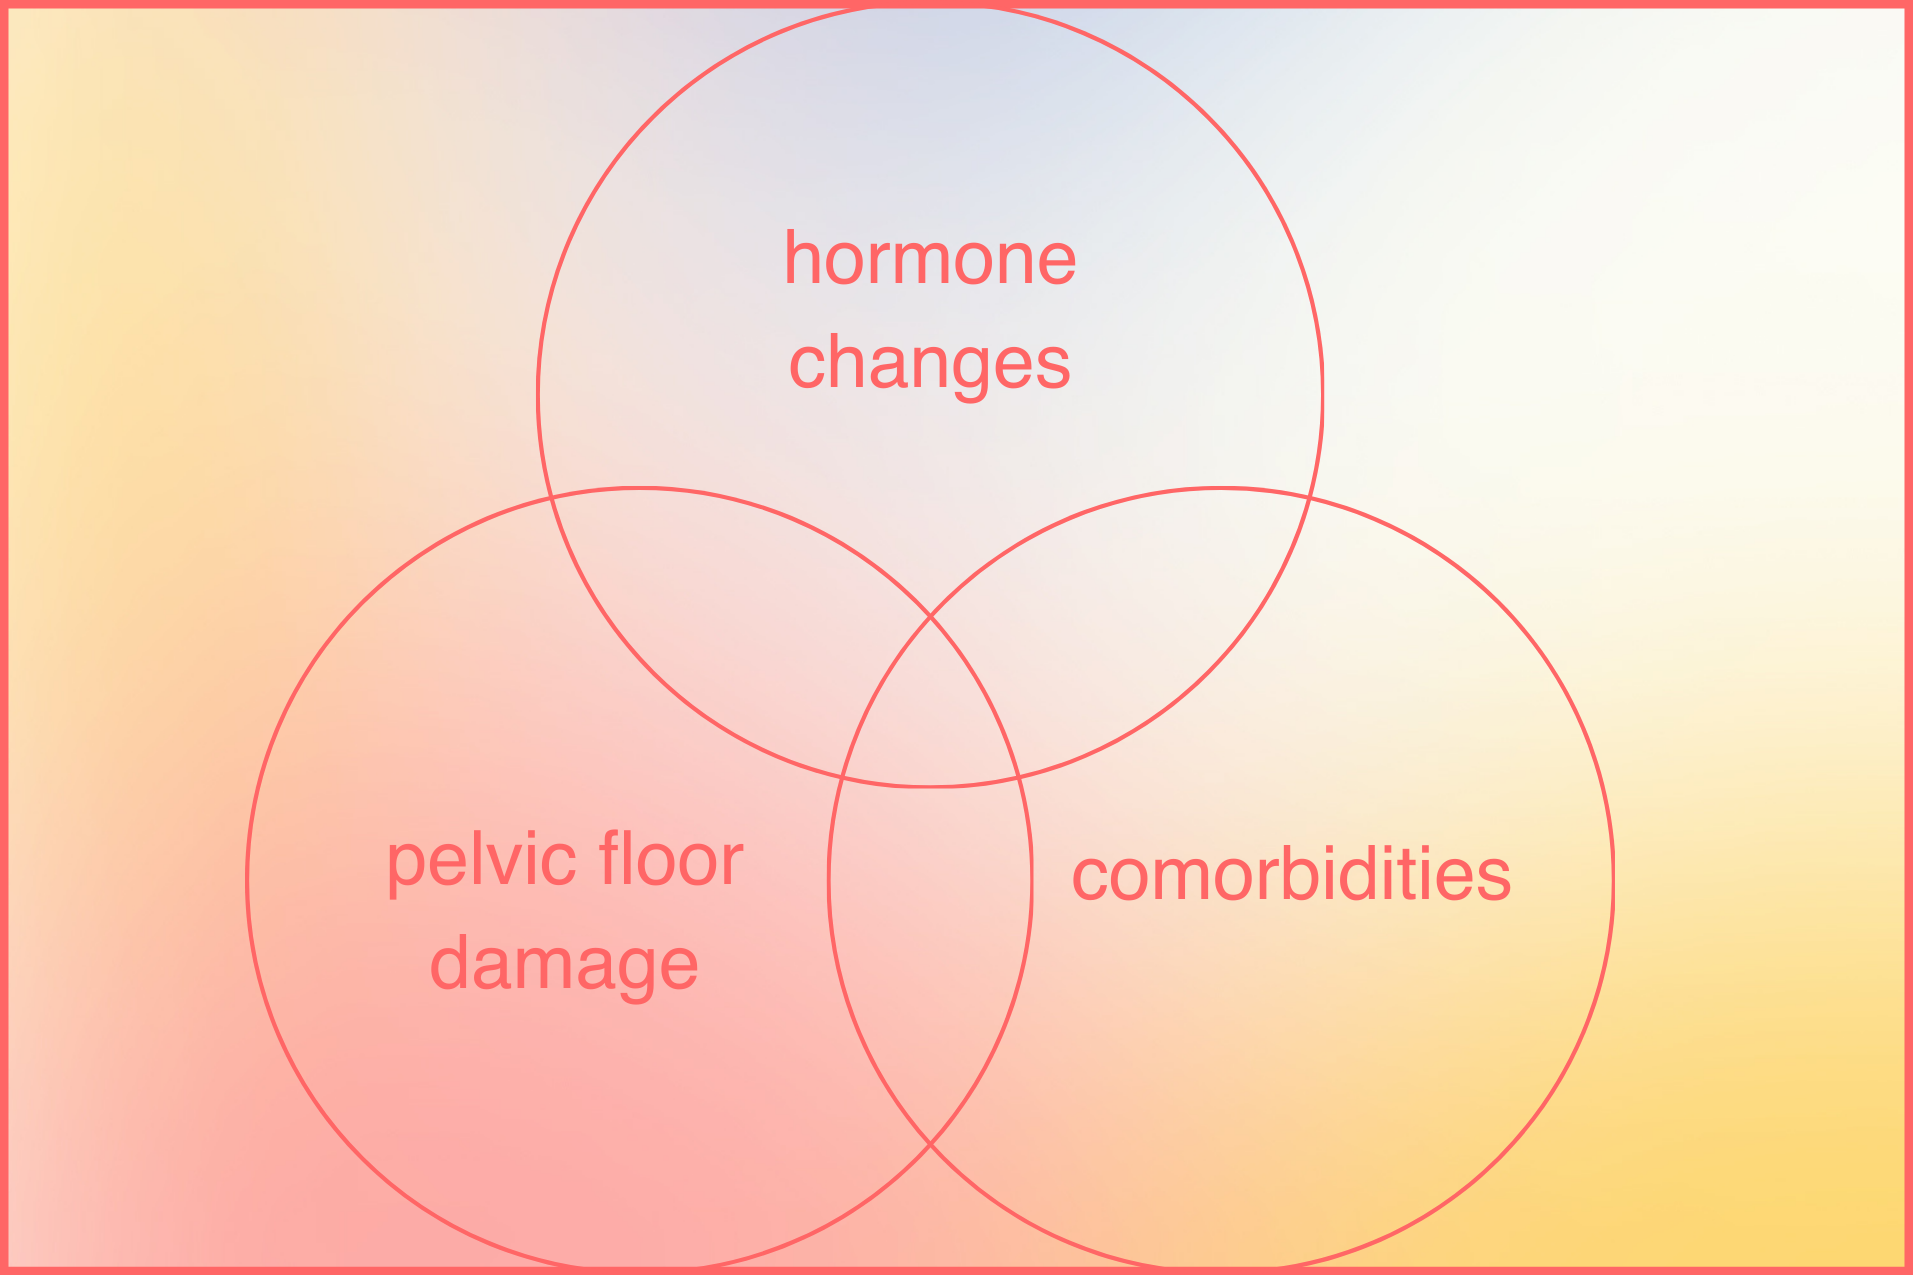 A graphic with three circles and text that reads "hormone changes", "pelvic floor damage", and "comorbidities".